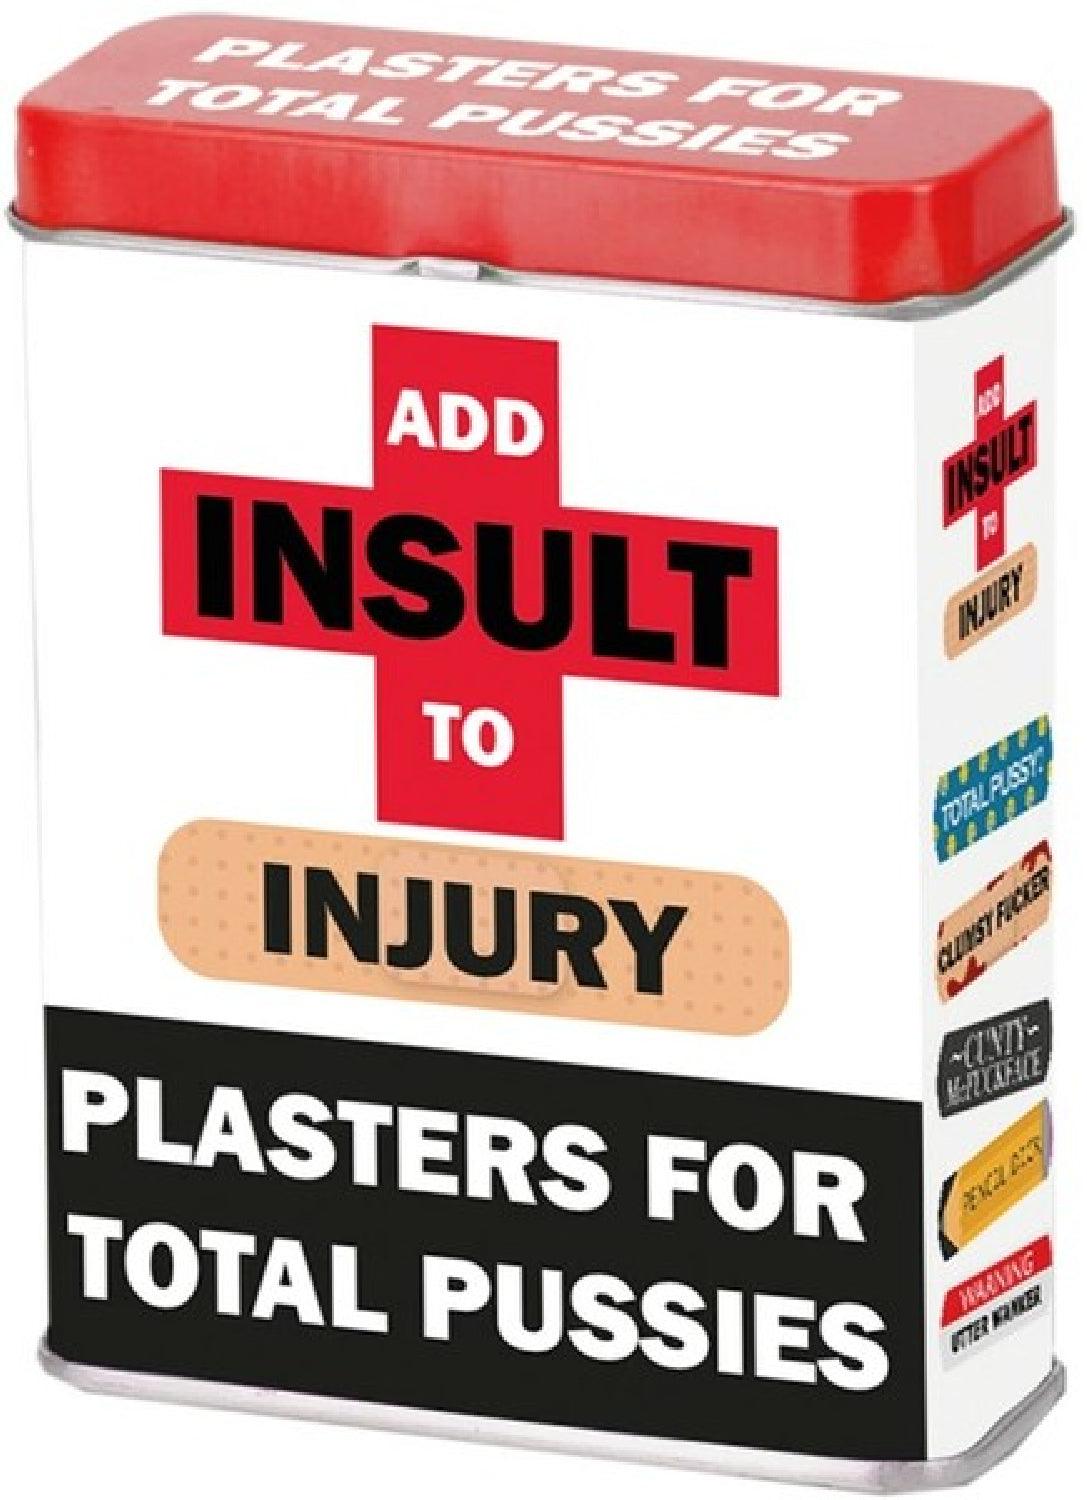 Add Insult To Injury Plasters - Take A Peek